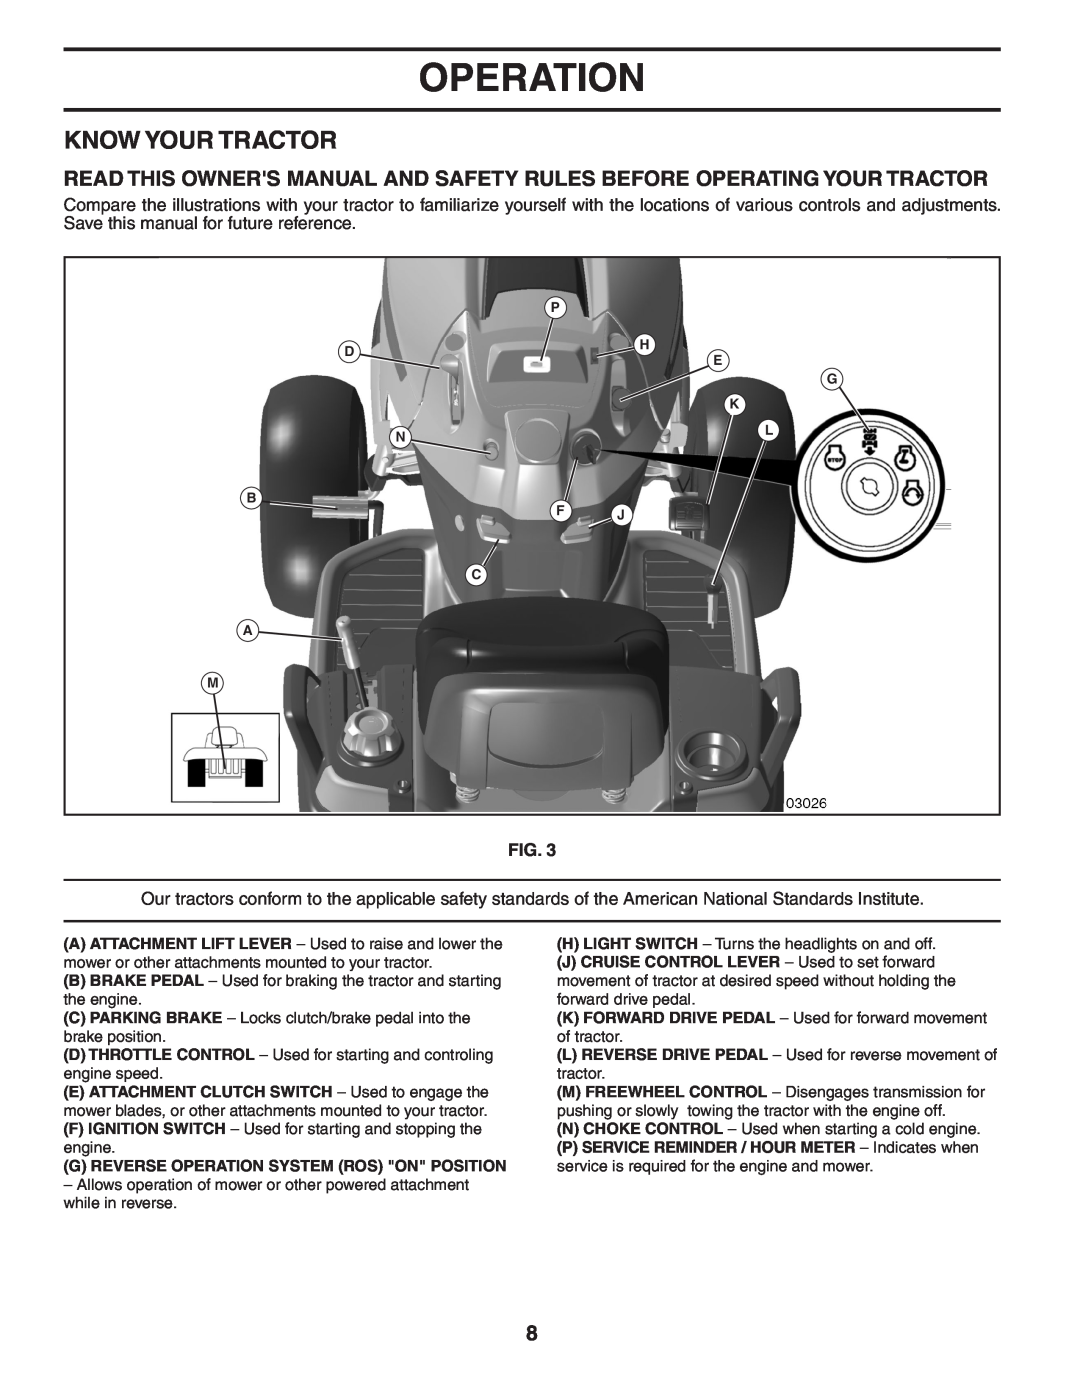 Husqvarna YTH2042XP owner manual Know Your Tractor, Operation, Fig 